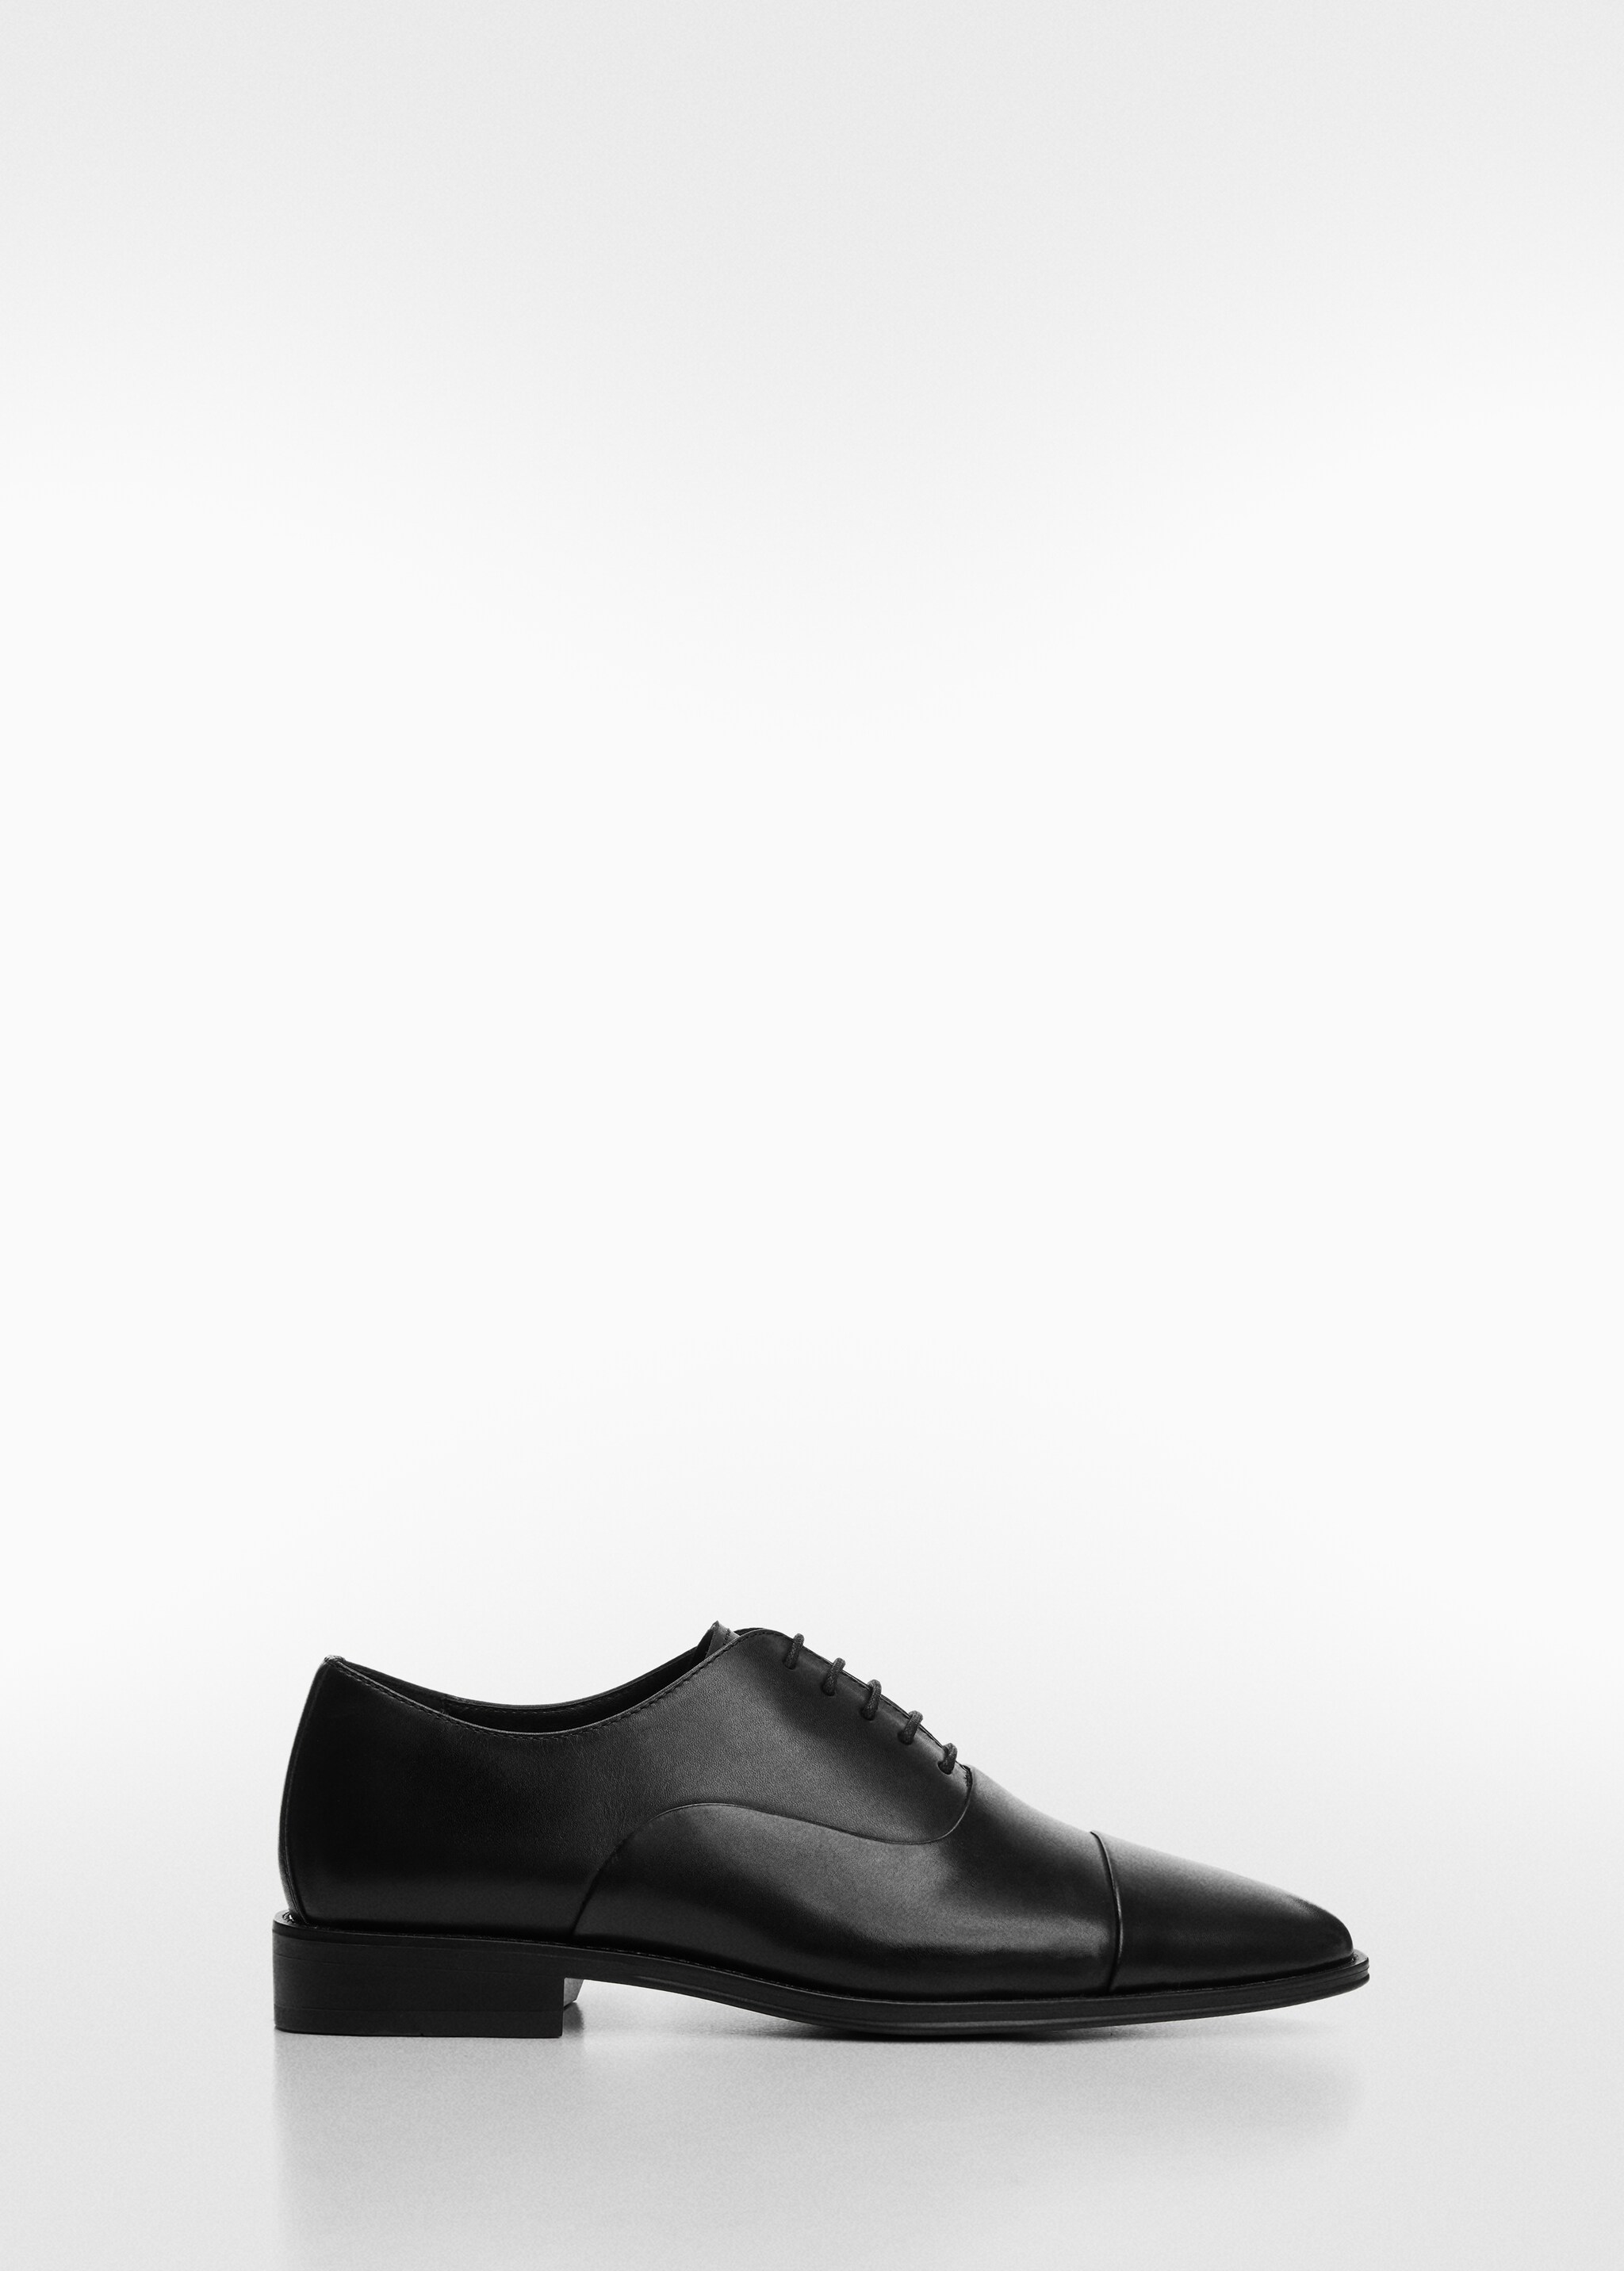 Elongated leather suit shoes - Article without model